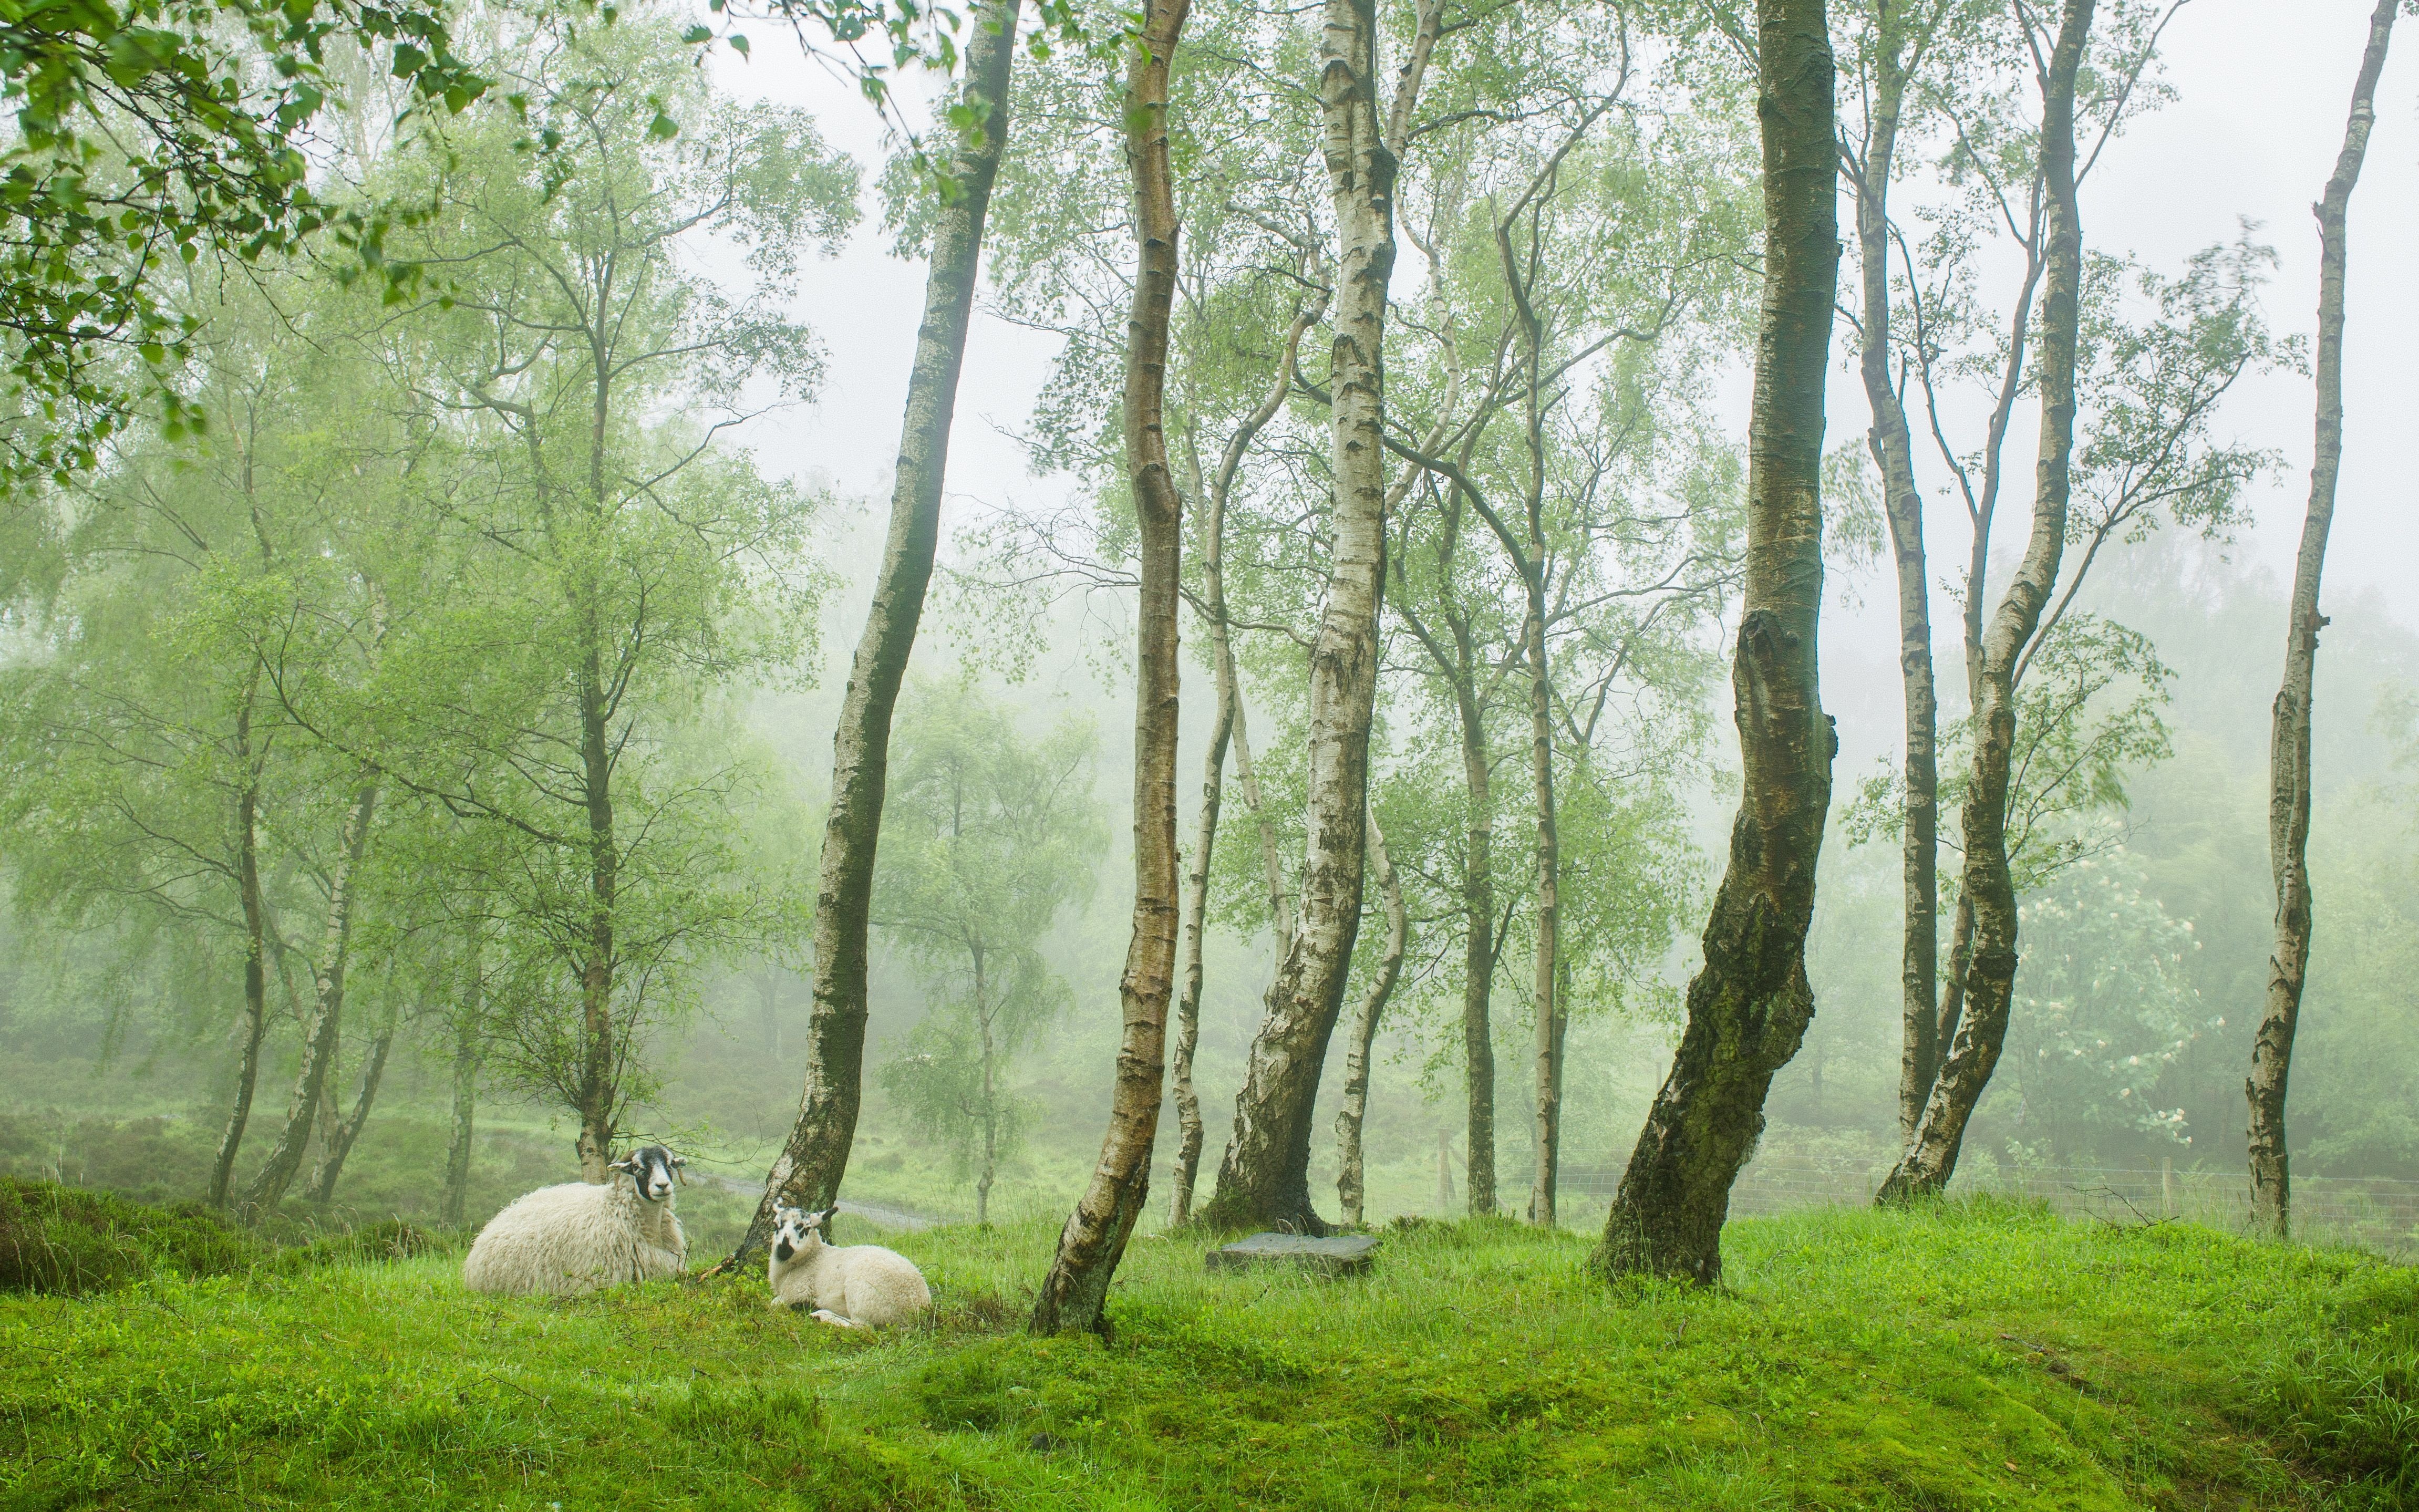 trees, Meadow, Sheep, Nature, Forest, Fog Wallpaper